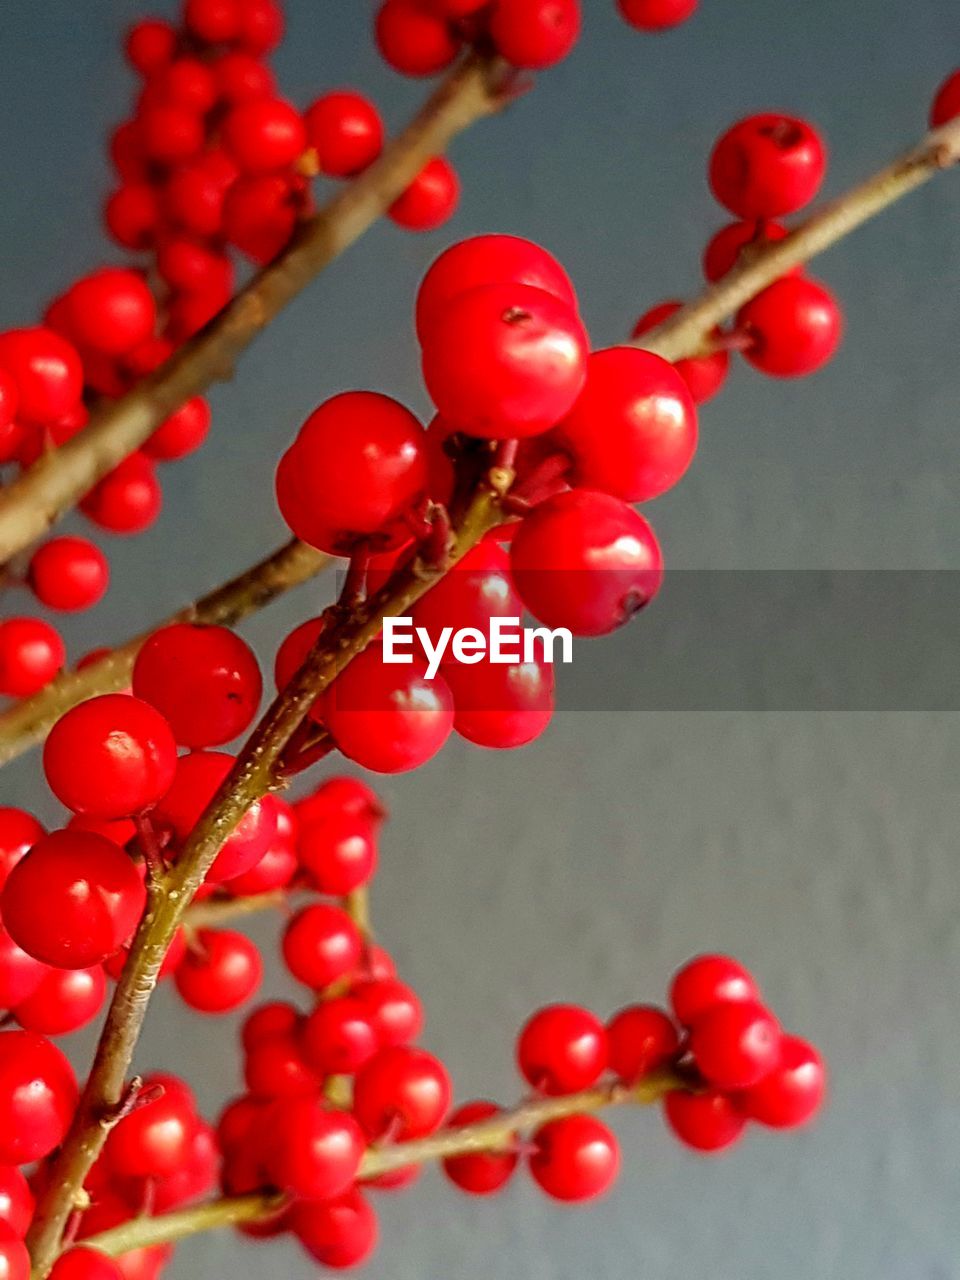 CLOSE-UP OF RED BERRIES ON PLANT